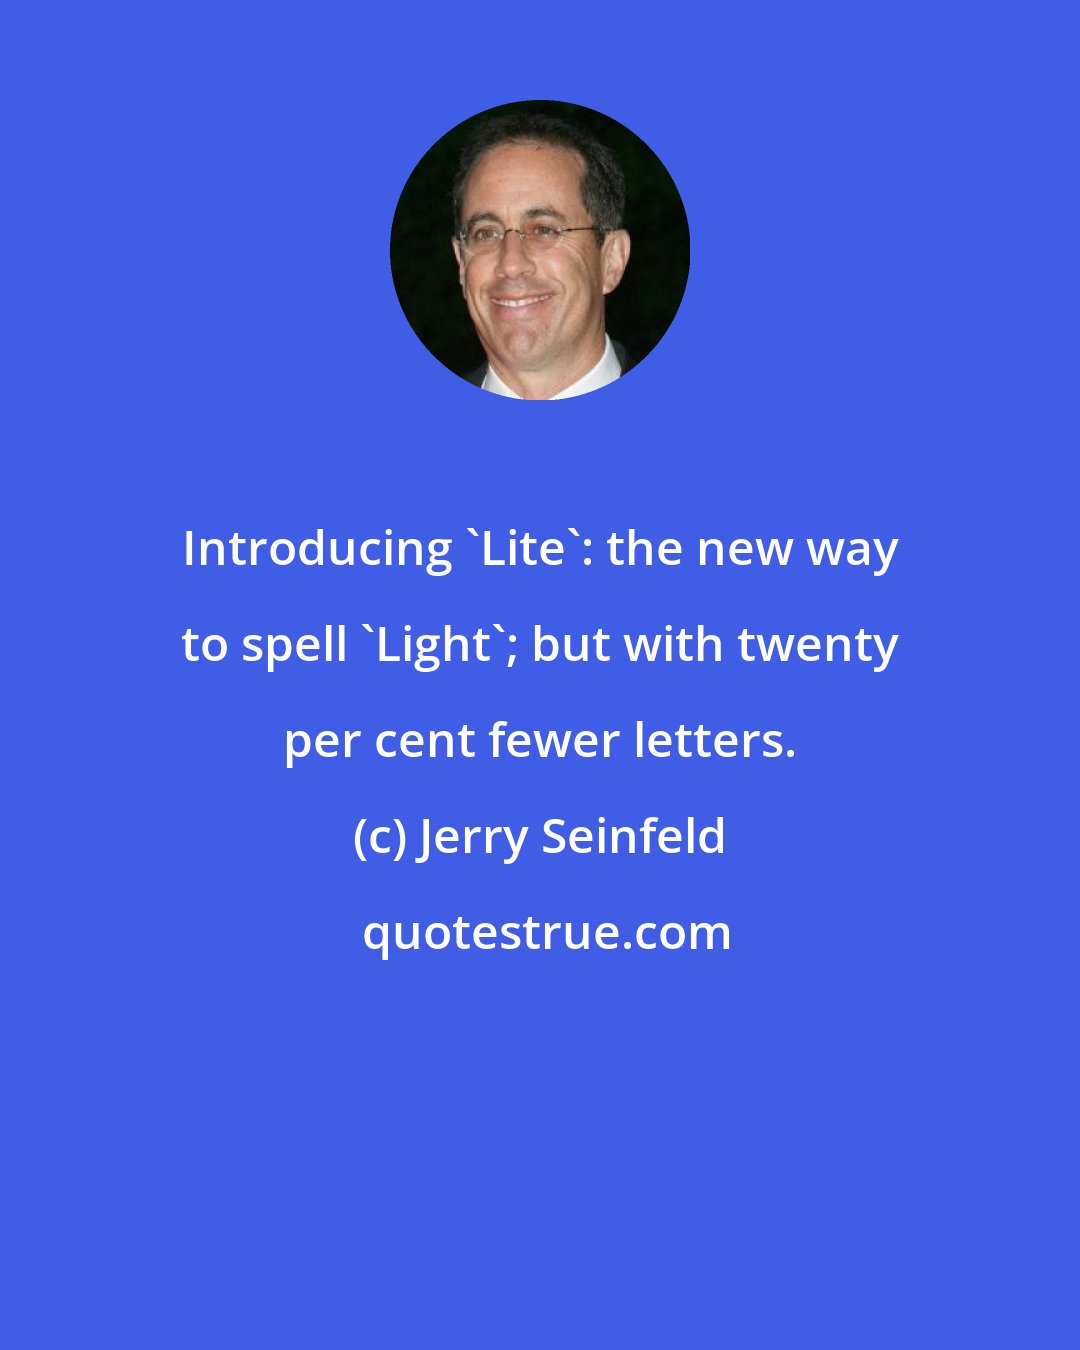 Jerry Seinfeld: Introducing 'Lite': the new way to spell 'Light'; but with twenty per cent fewer letters.